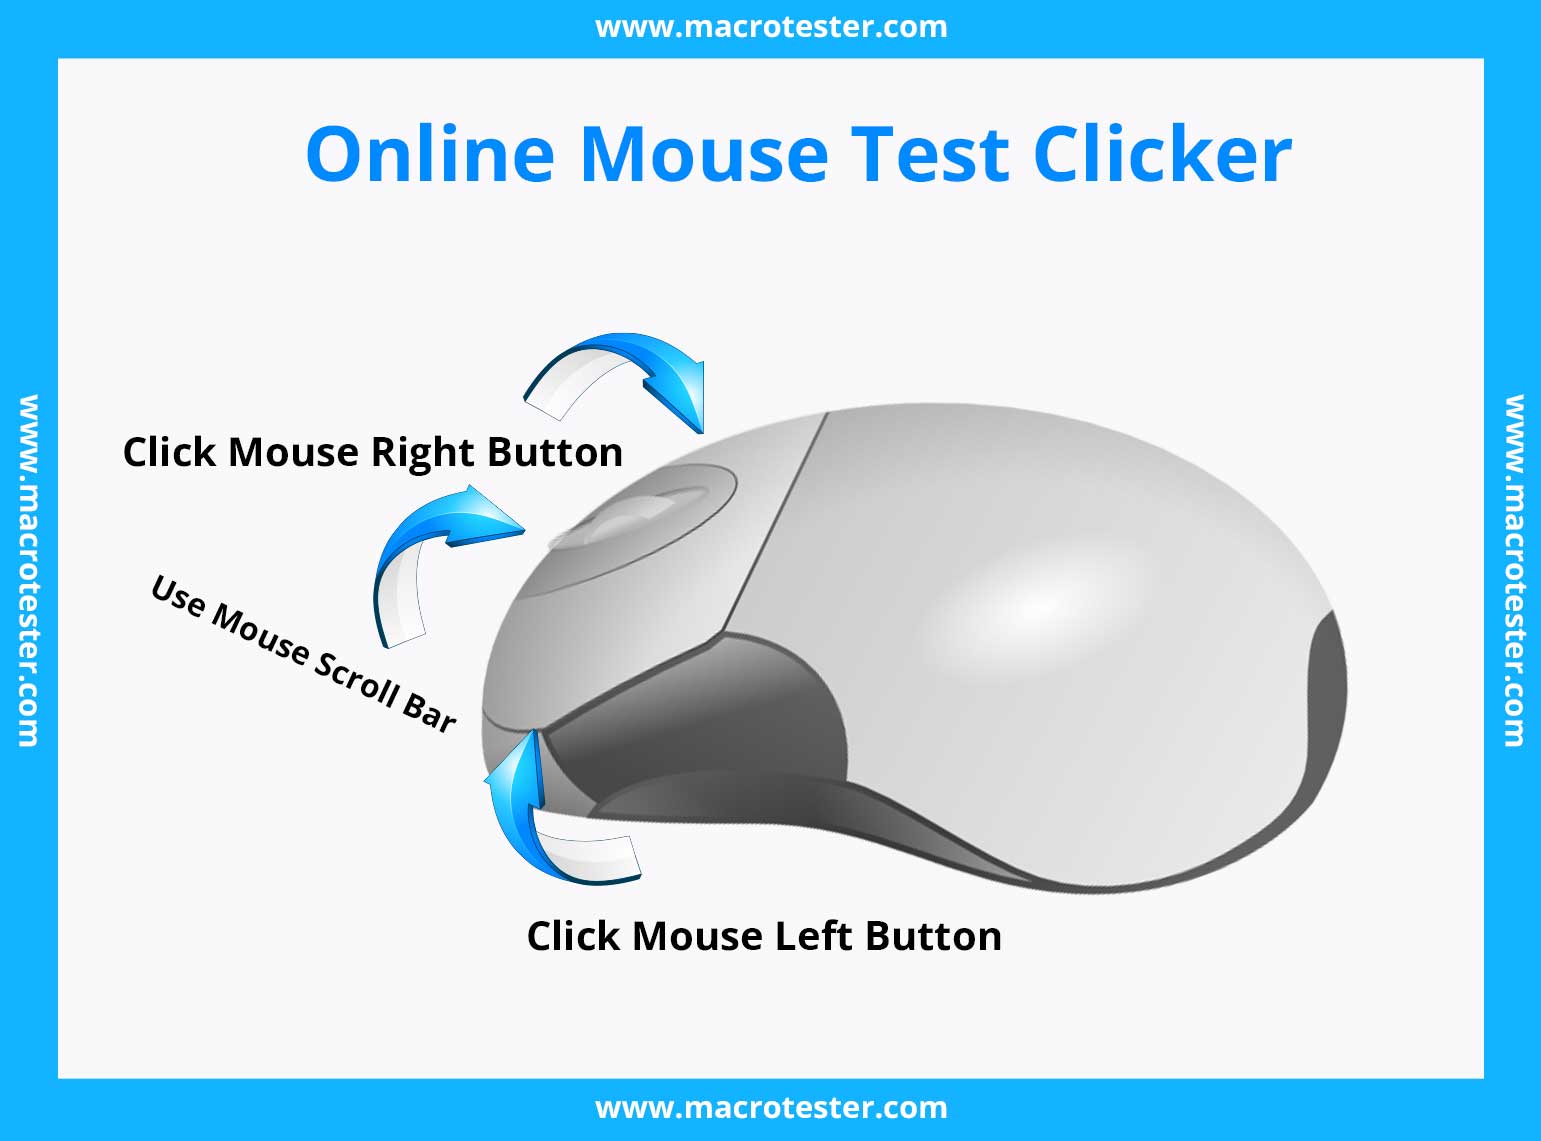 mouse tester clicker online